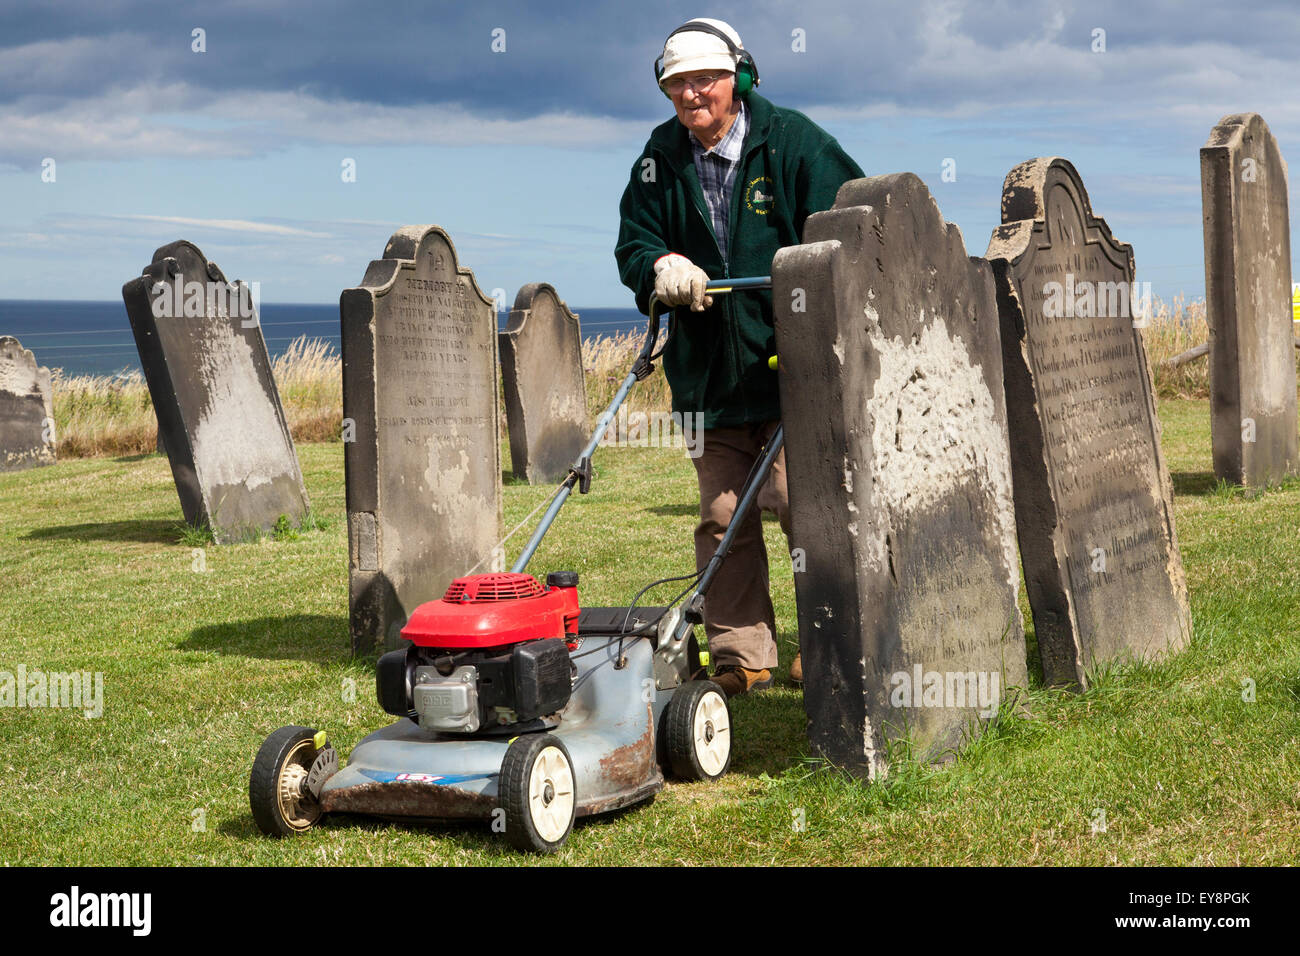 A man cutting the grass in the churchyard at St Mary's Church, Whitby, North Yorkshire, England, U.K. Stock Photo